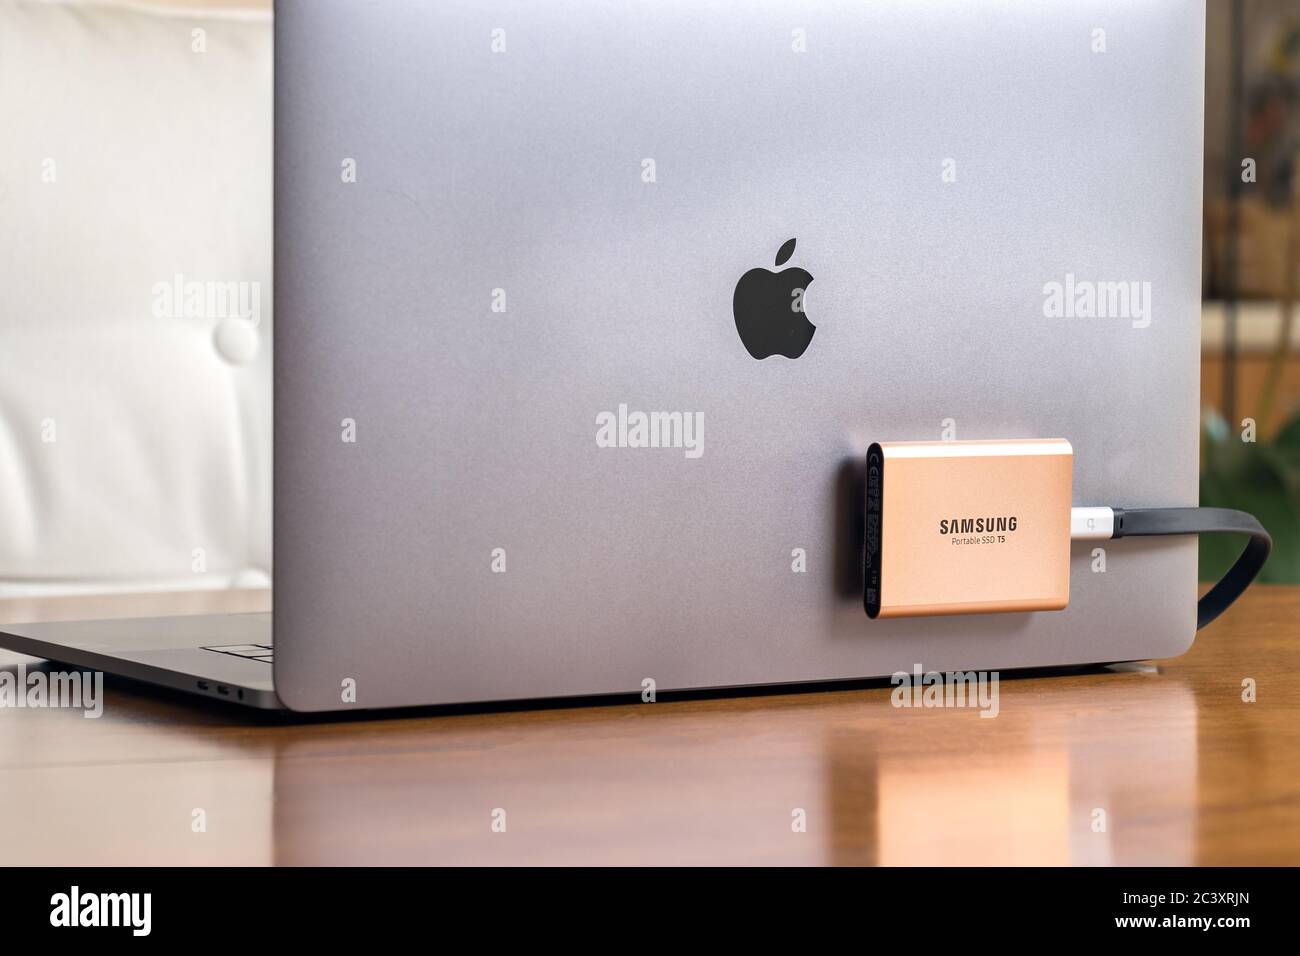 A Samsung T5 Portable SSD hard drive connected to a Macbook Pro laptop  Stock Photo - Alamy